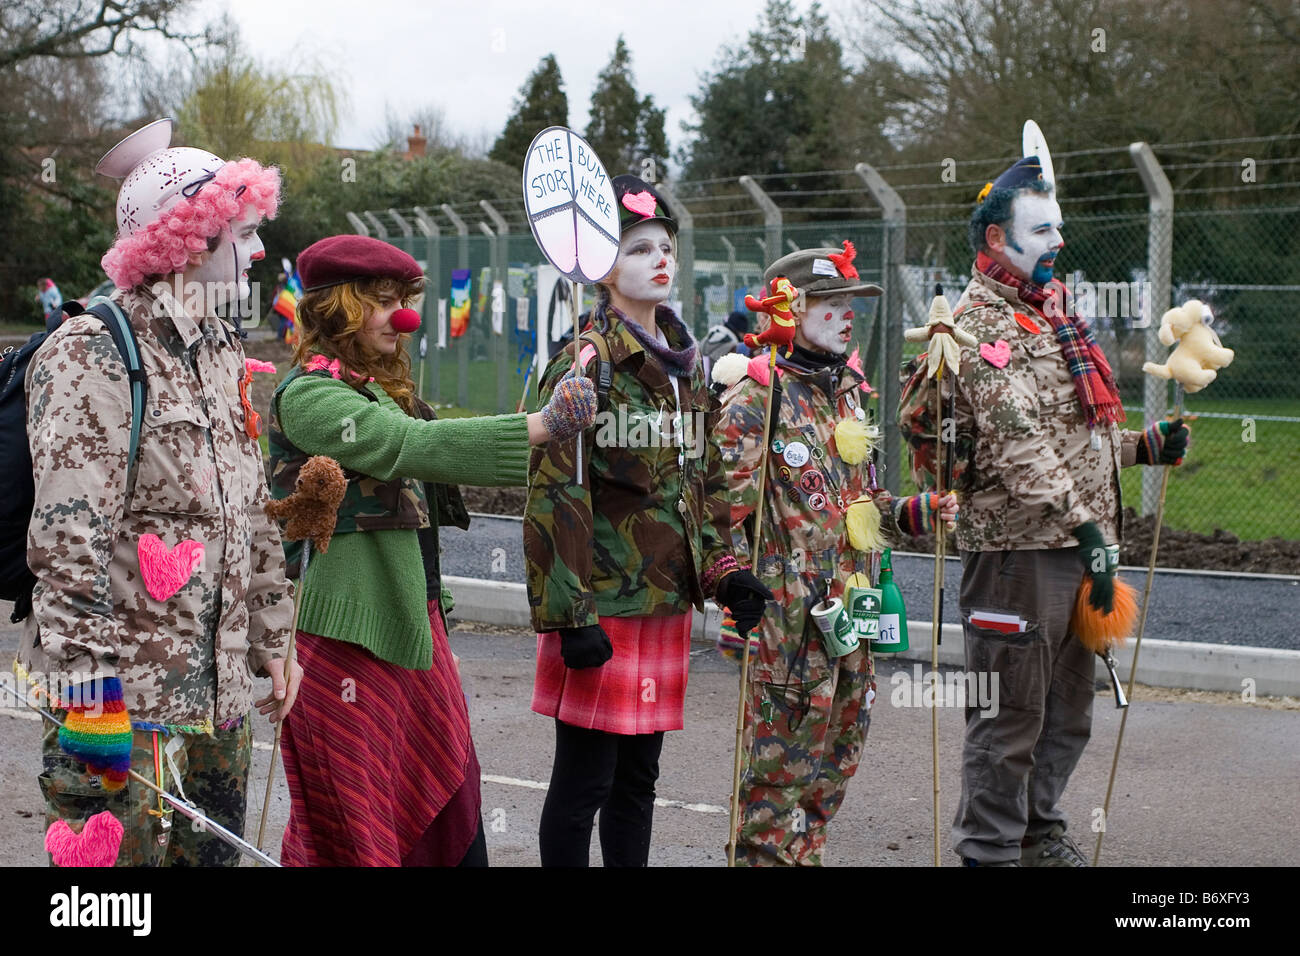 The Clandestine Insurgent Rebel Clown Army protesting at the gates of AWE Aldermaston at the CND Easter 2008 protest Stock Photo